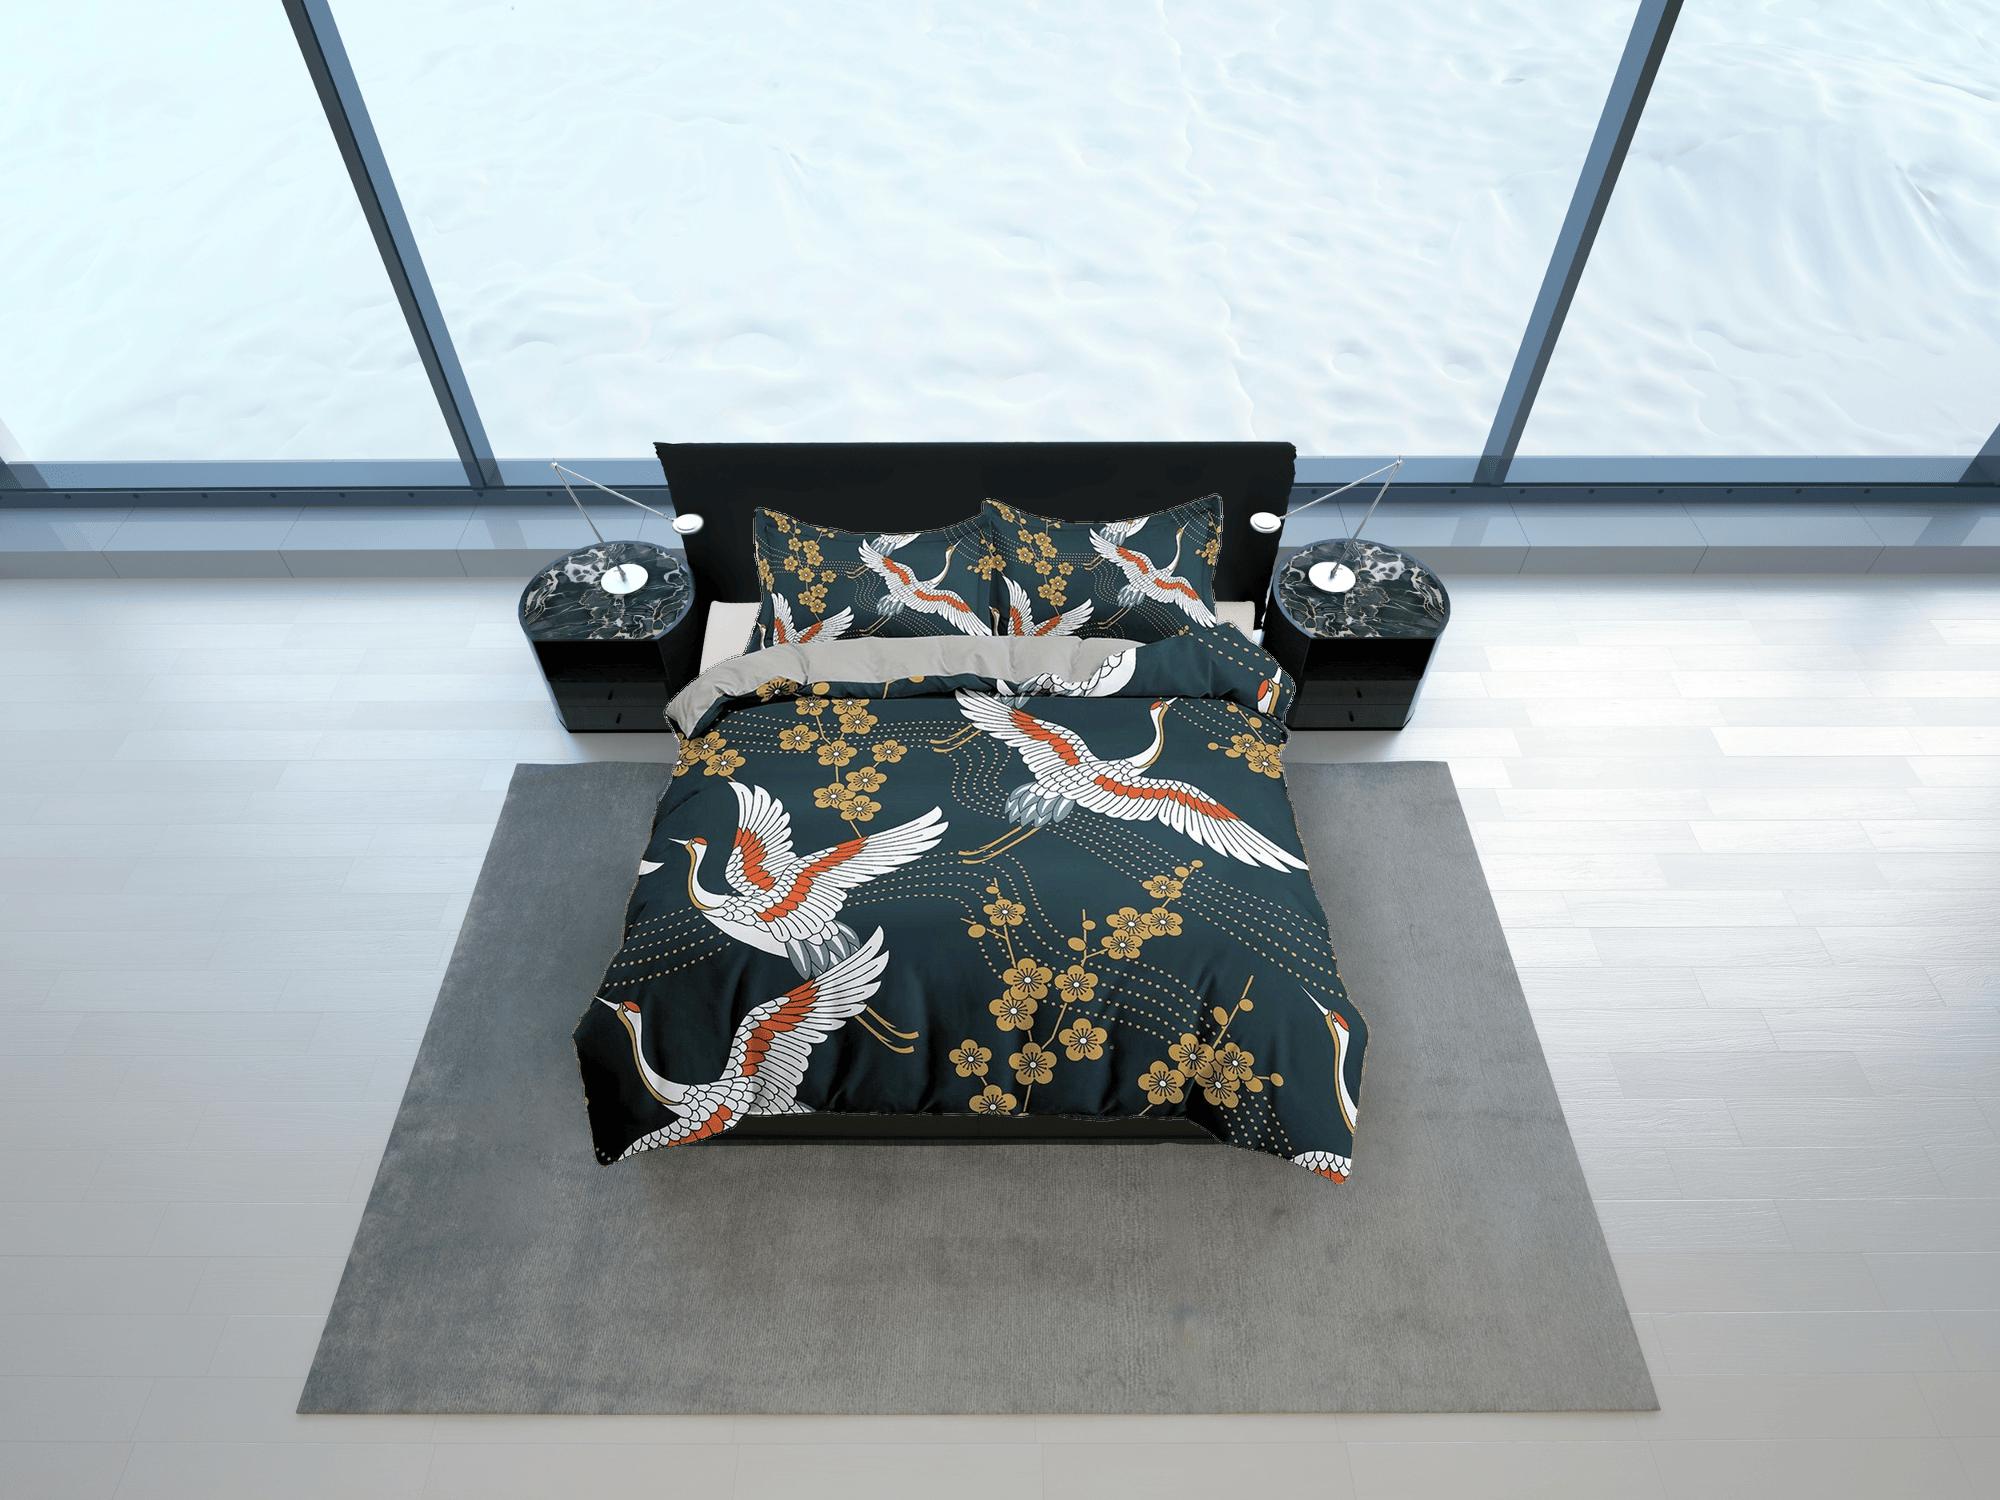 daintyduvet Dark green oriental bedding set cover, crane bird and cherry blossom floral prints on Japanese style duvet cover, king, queen, full, twin